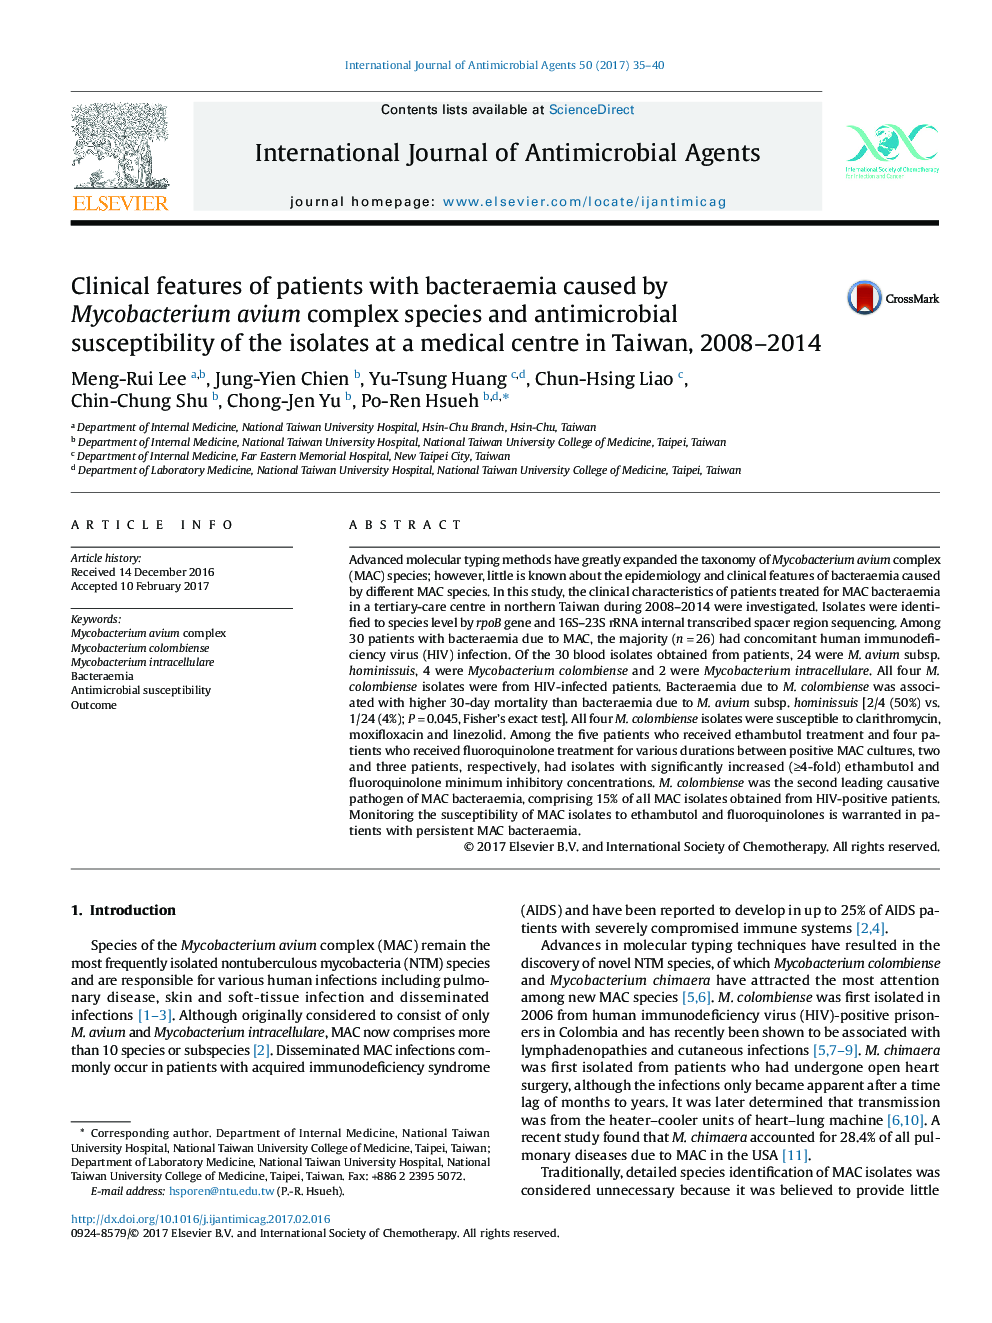 Clinical features of patients with bacteraemia caused by Mycobacterium avium complex species and antimicrobial susceptibility of the isolates at a medical centre in Taiwan, 2008-2014